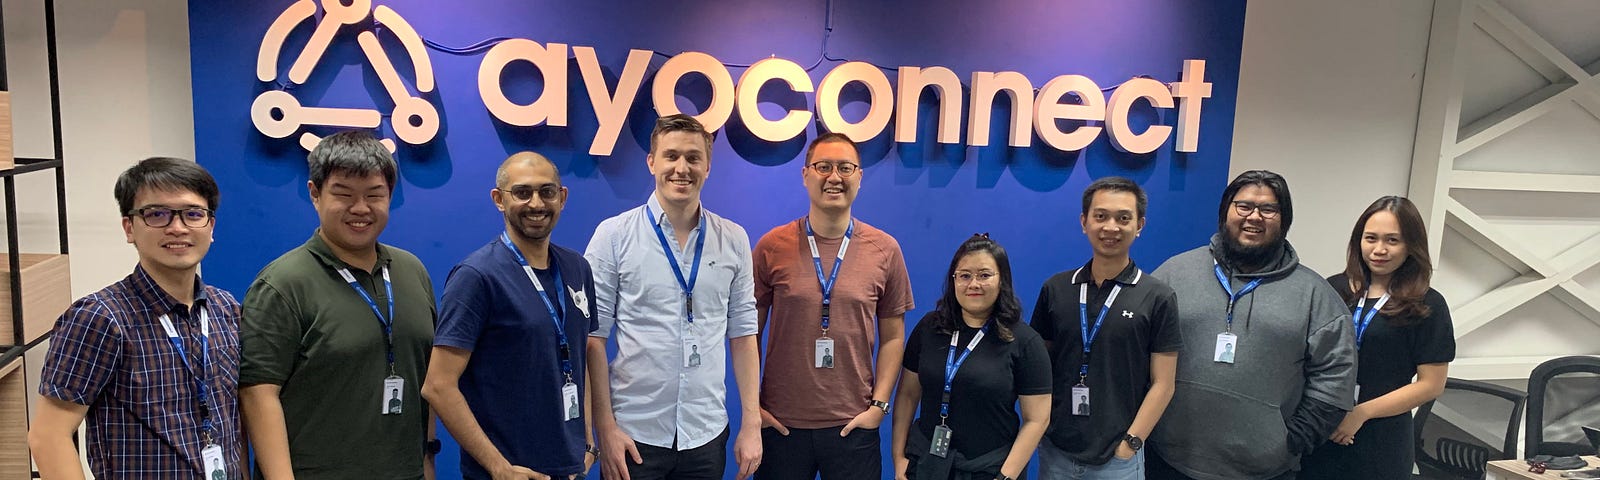 Ayoconnect team, after the rebranding in Aug 2020